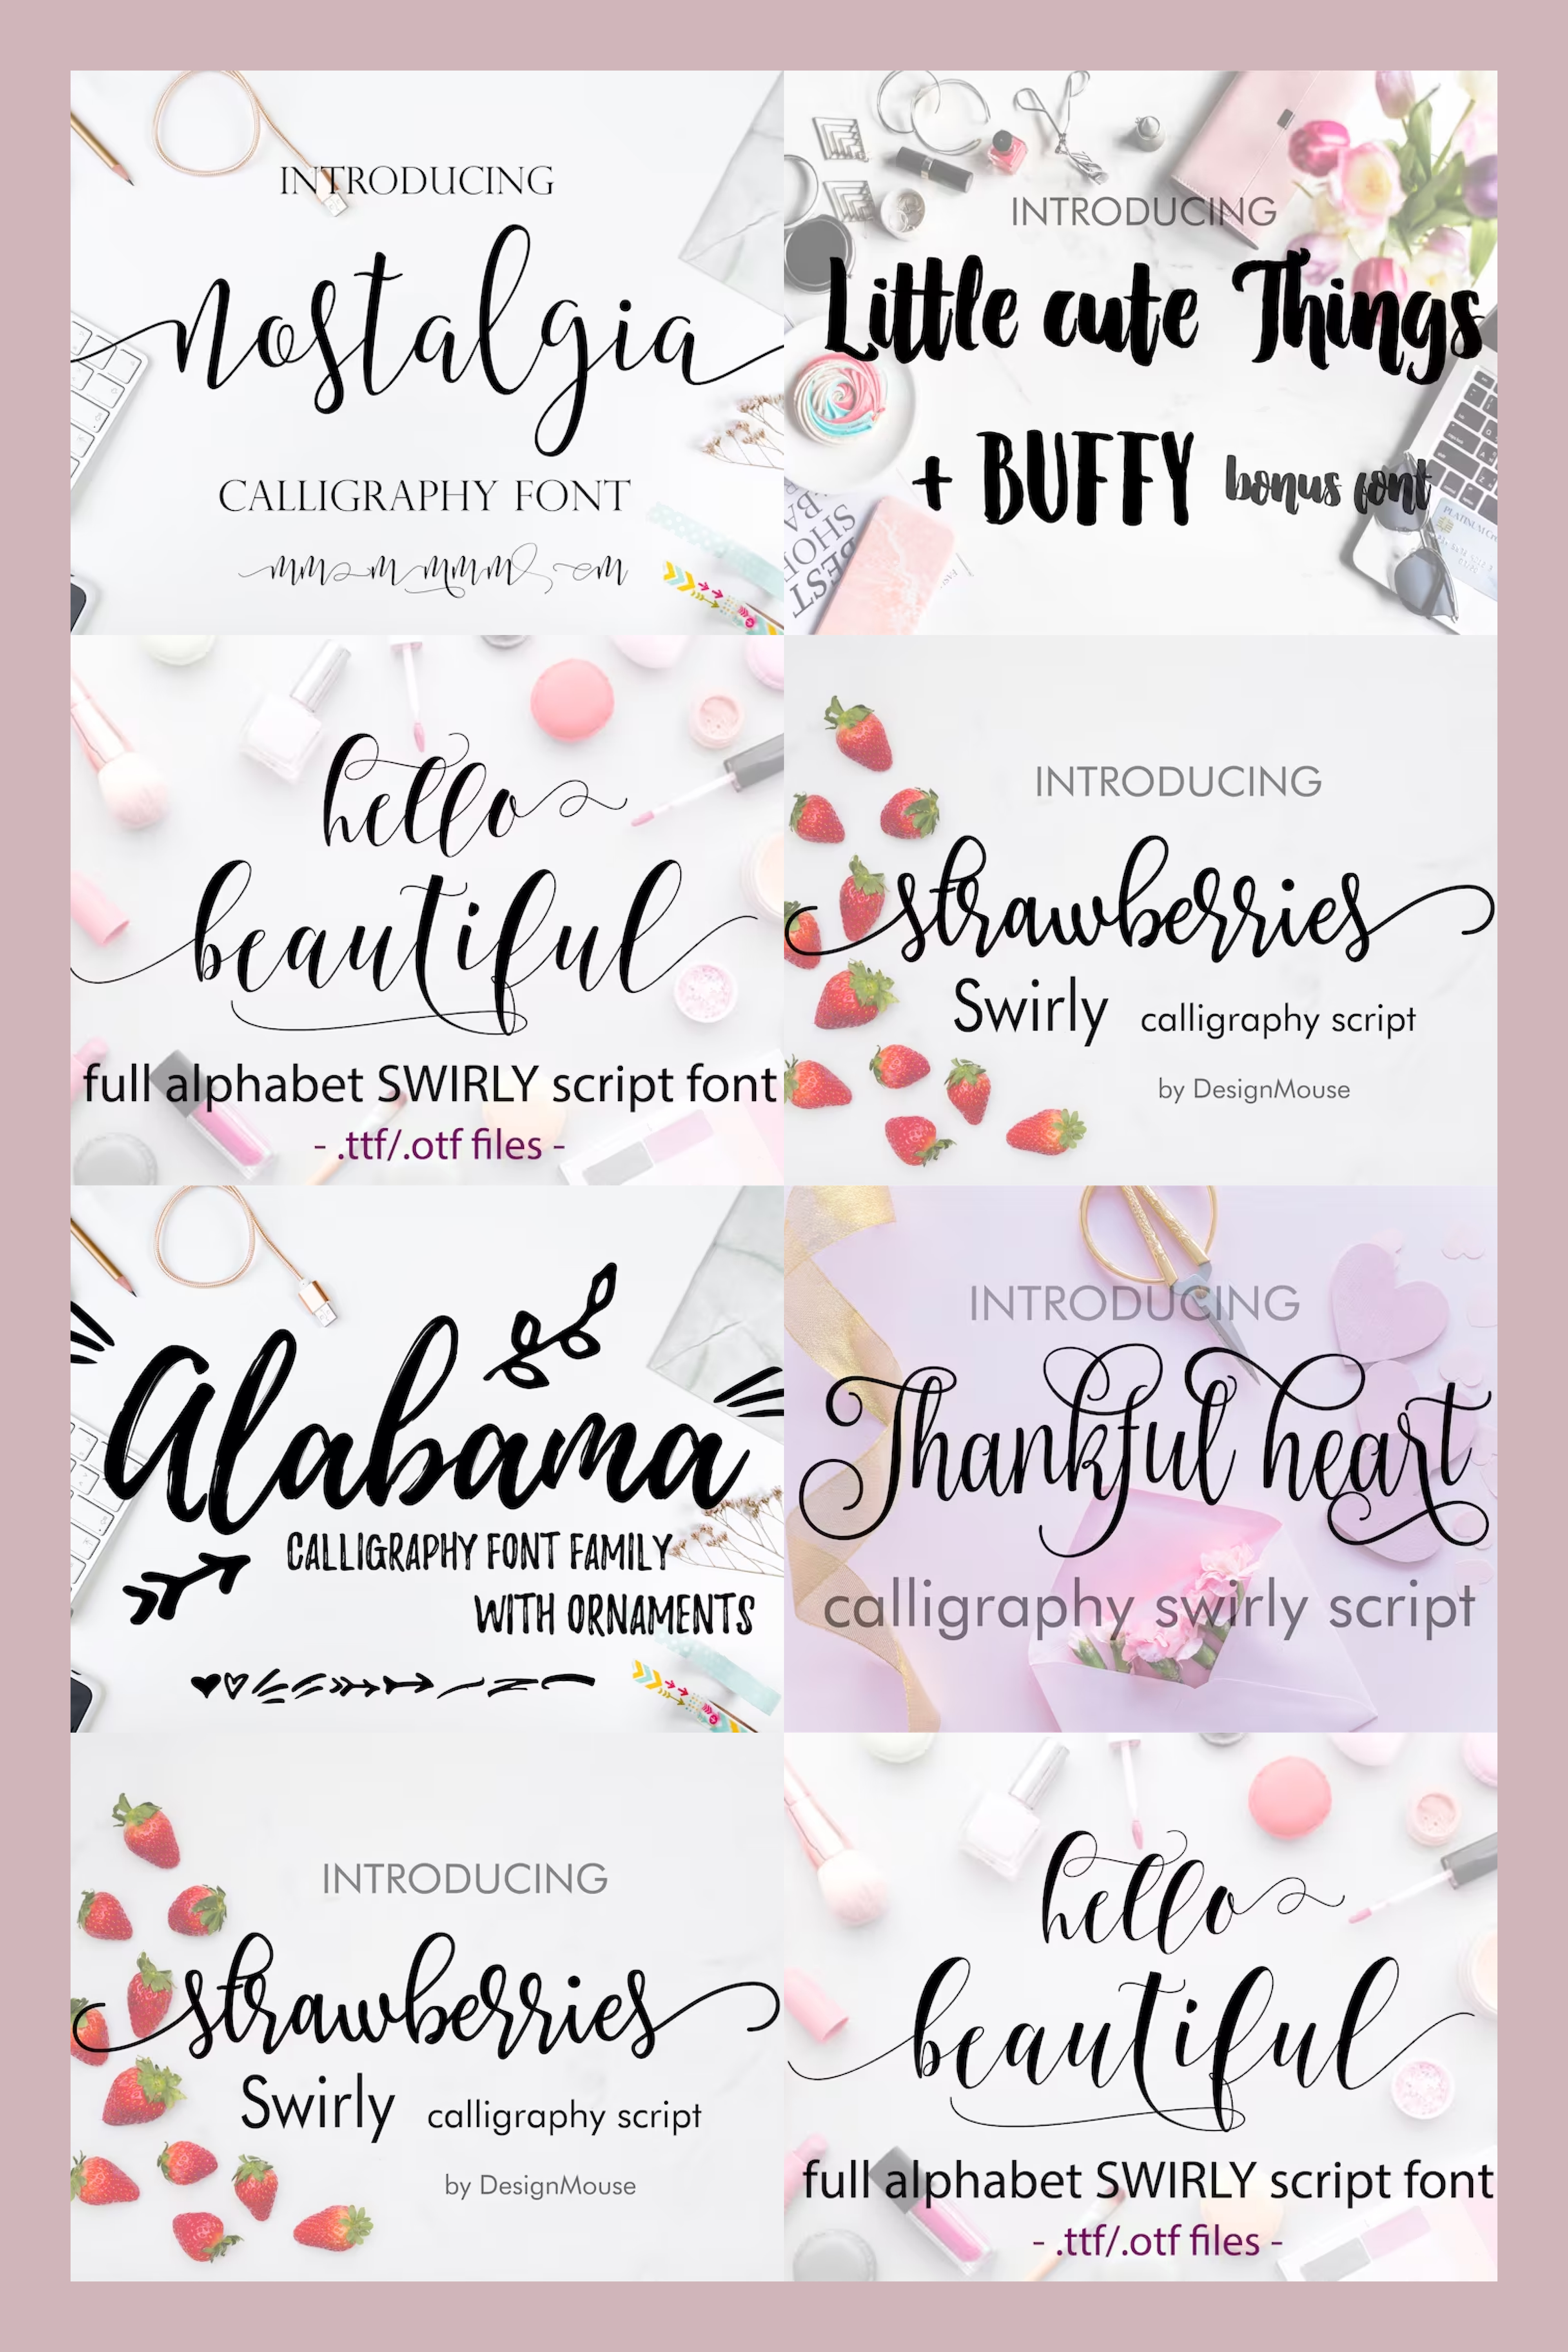 A collage of examples of the use of different fonts on a pink background.